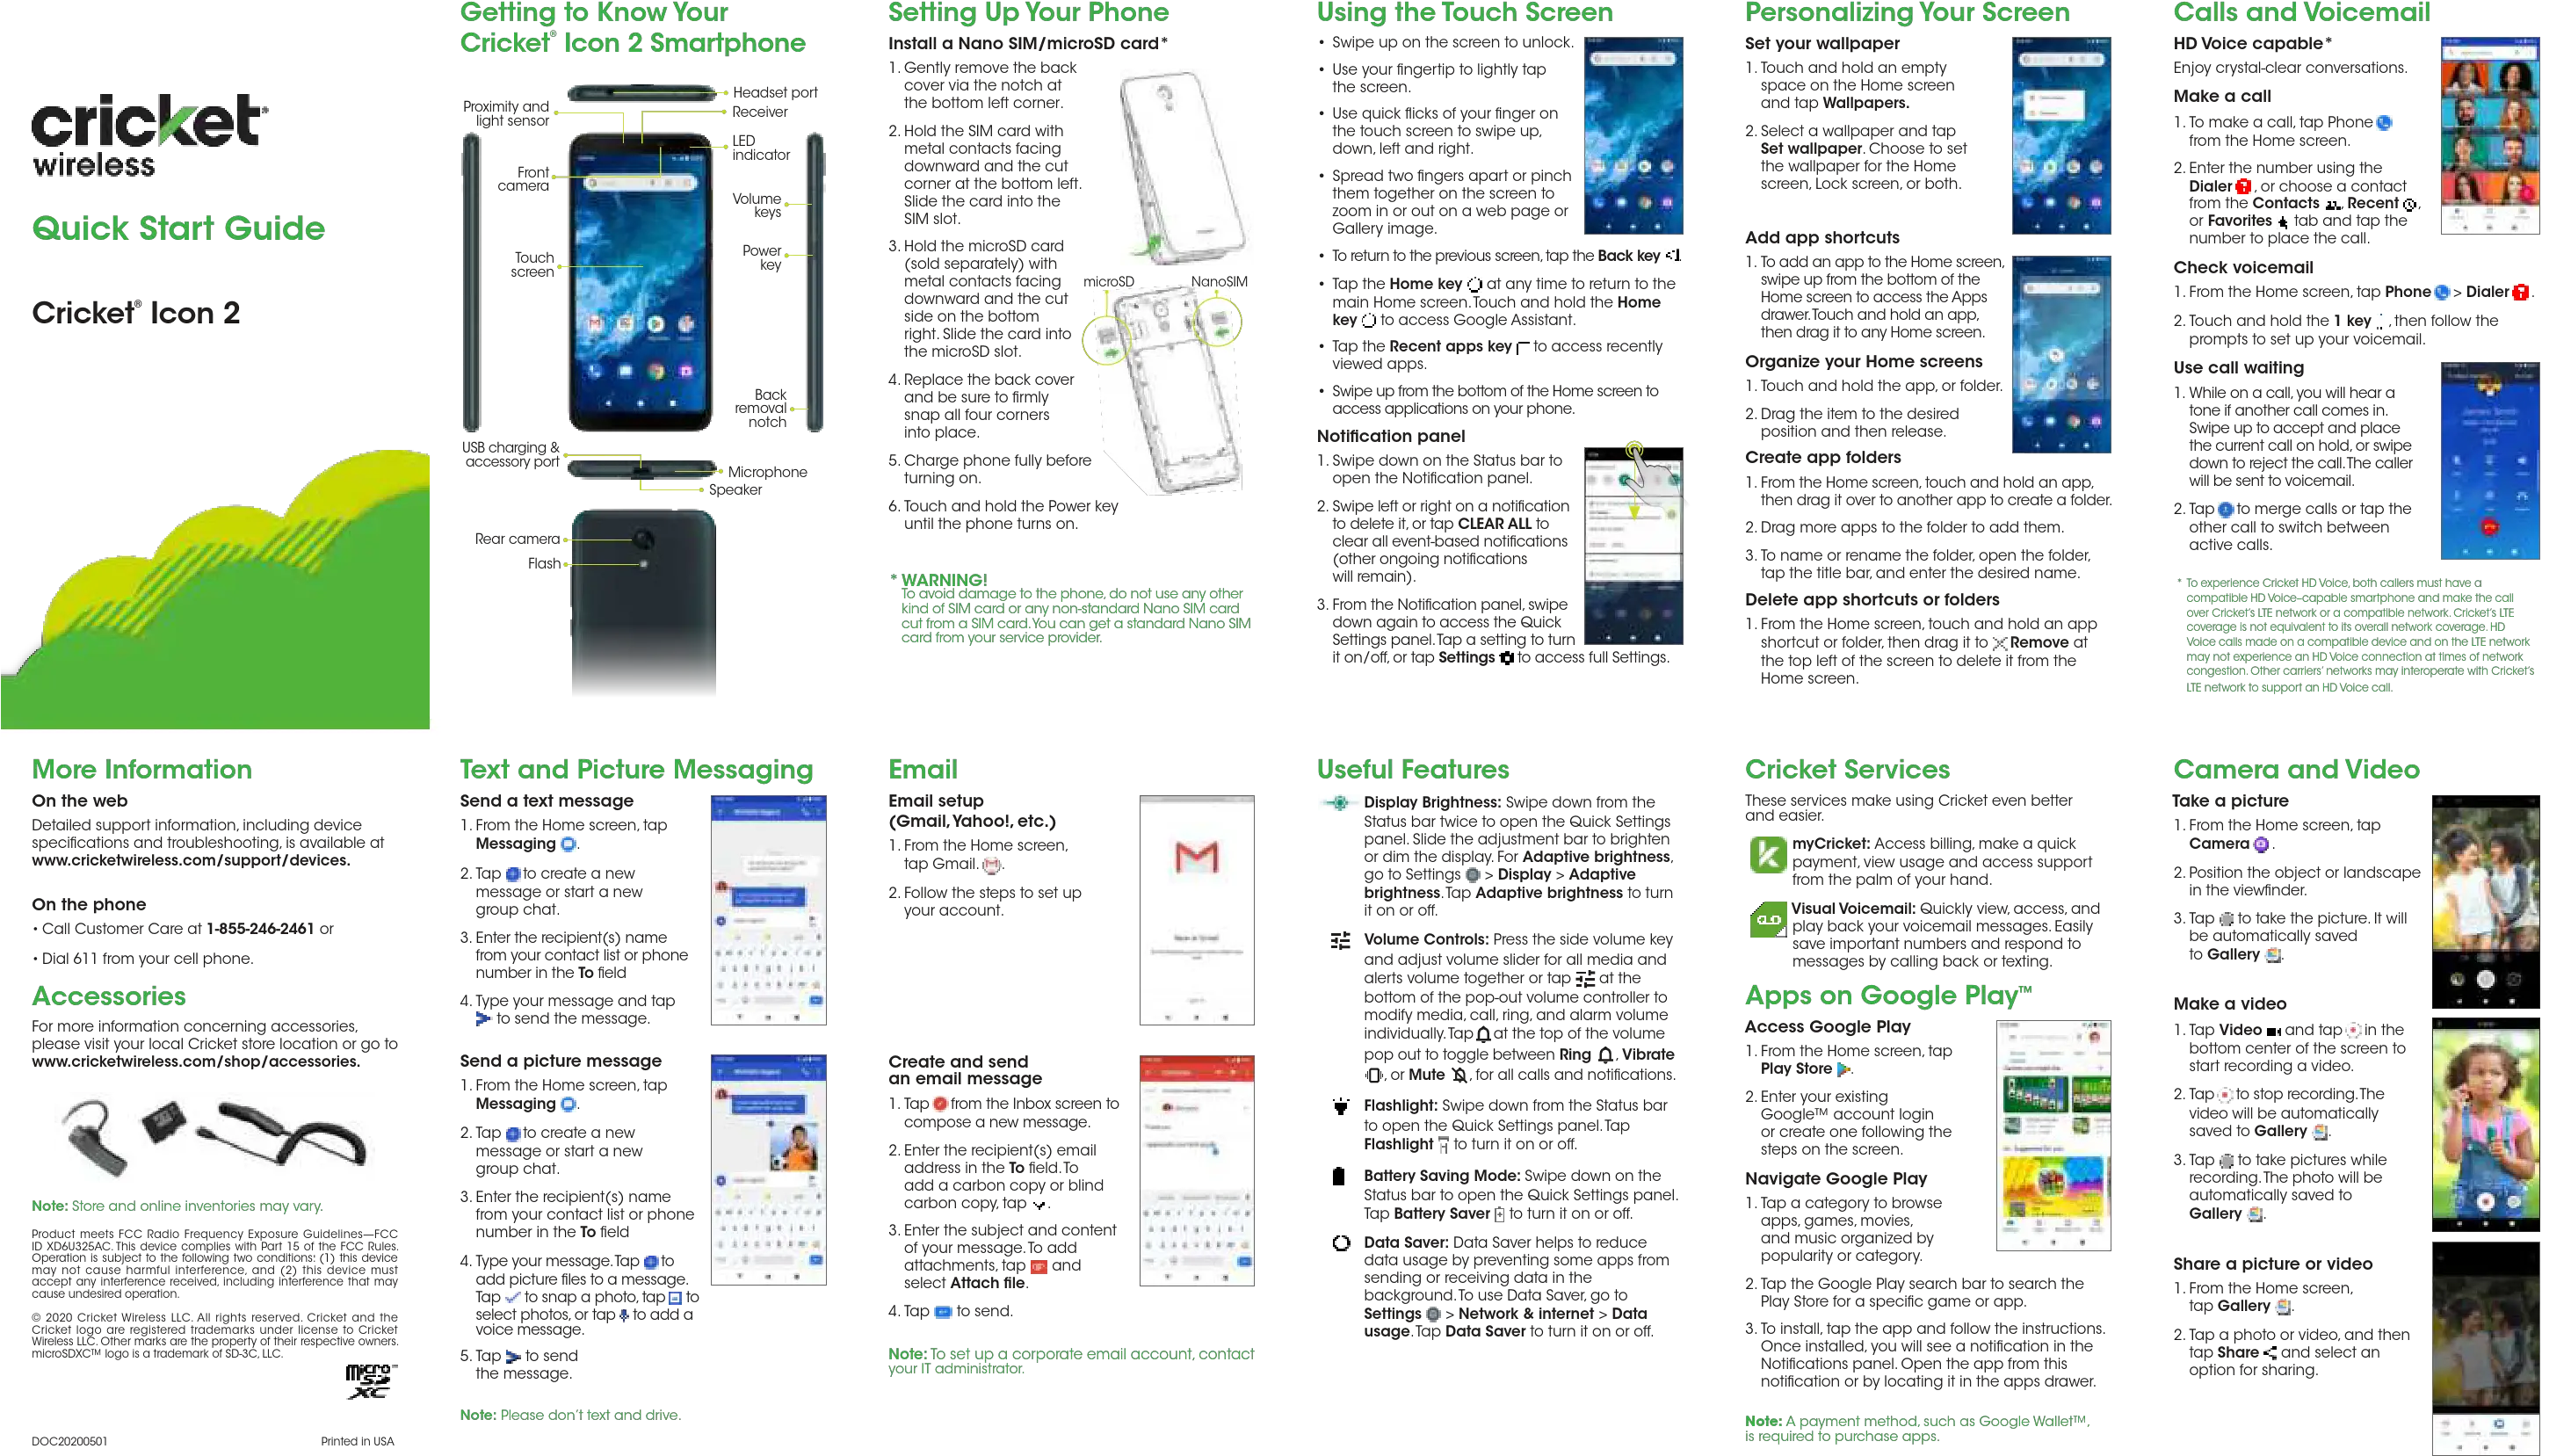 Cricket Icon 2 Smartphone User Guide Manuals Vertical Png Micro Sd Icon